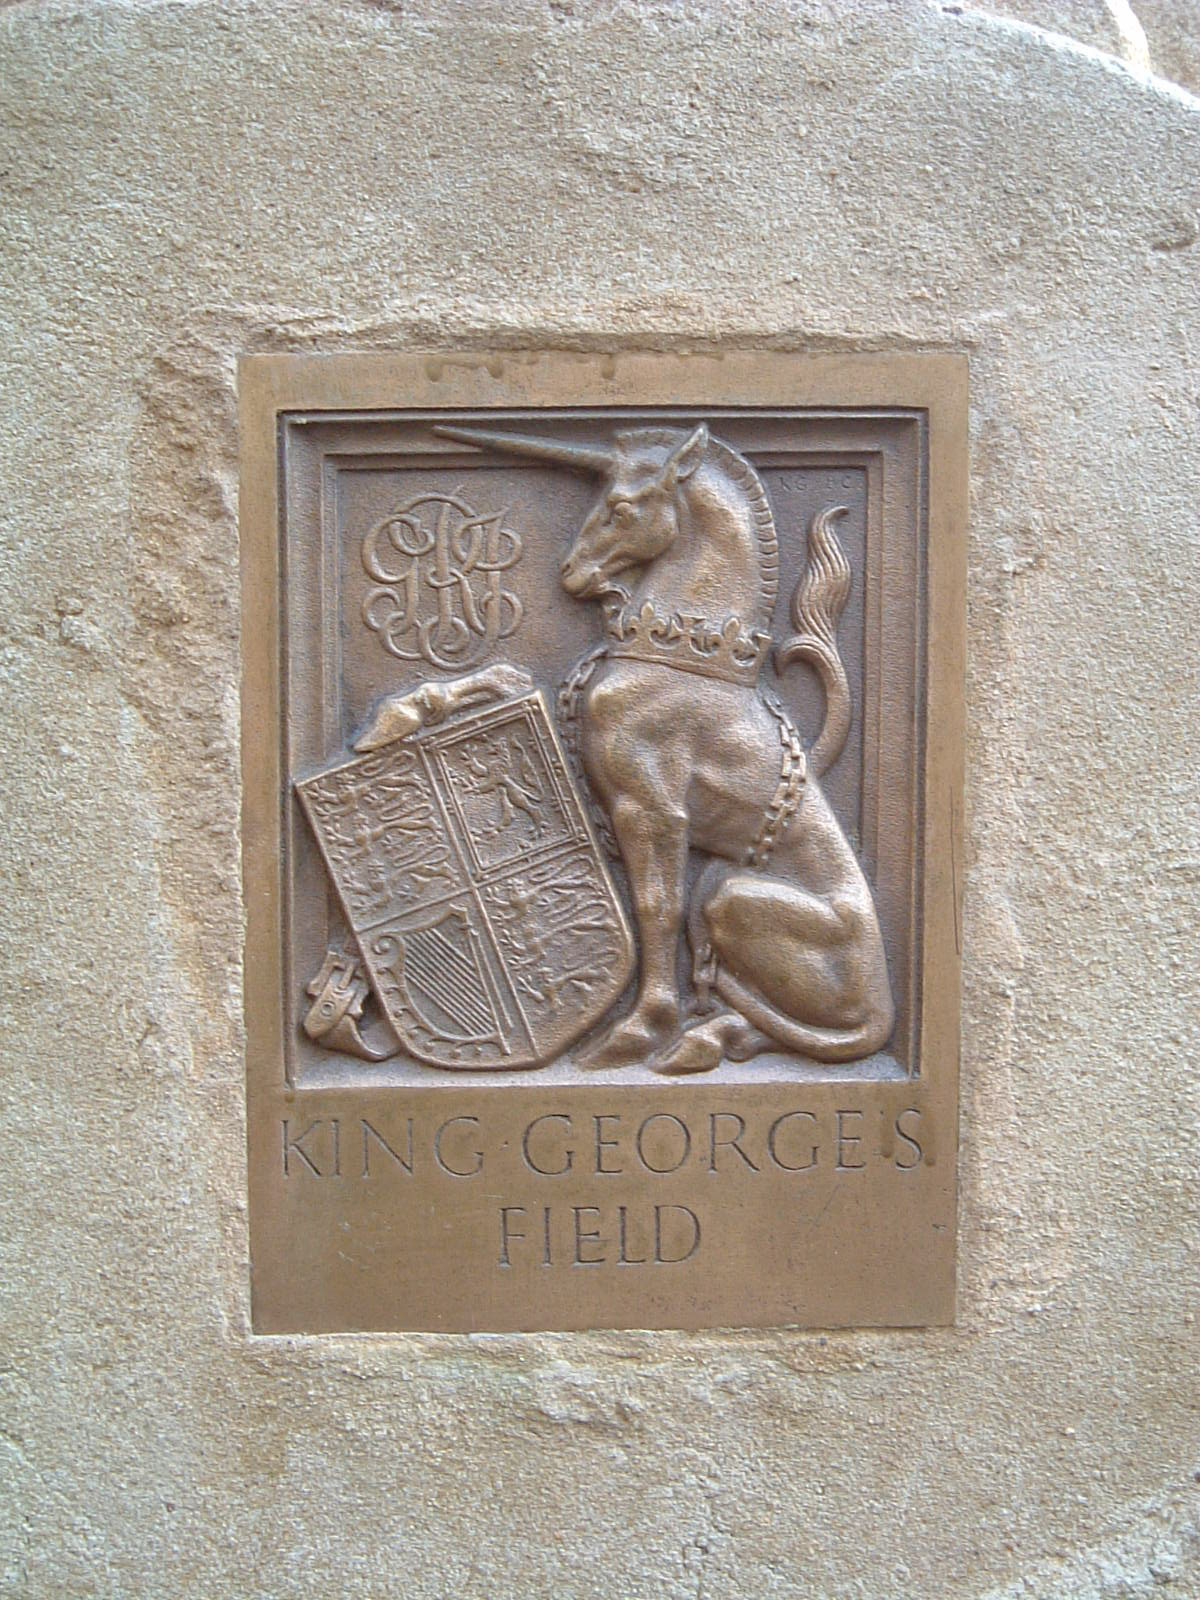 A unicorn on the entrance to King George's Fields